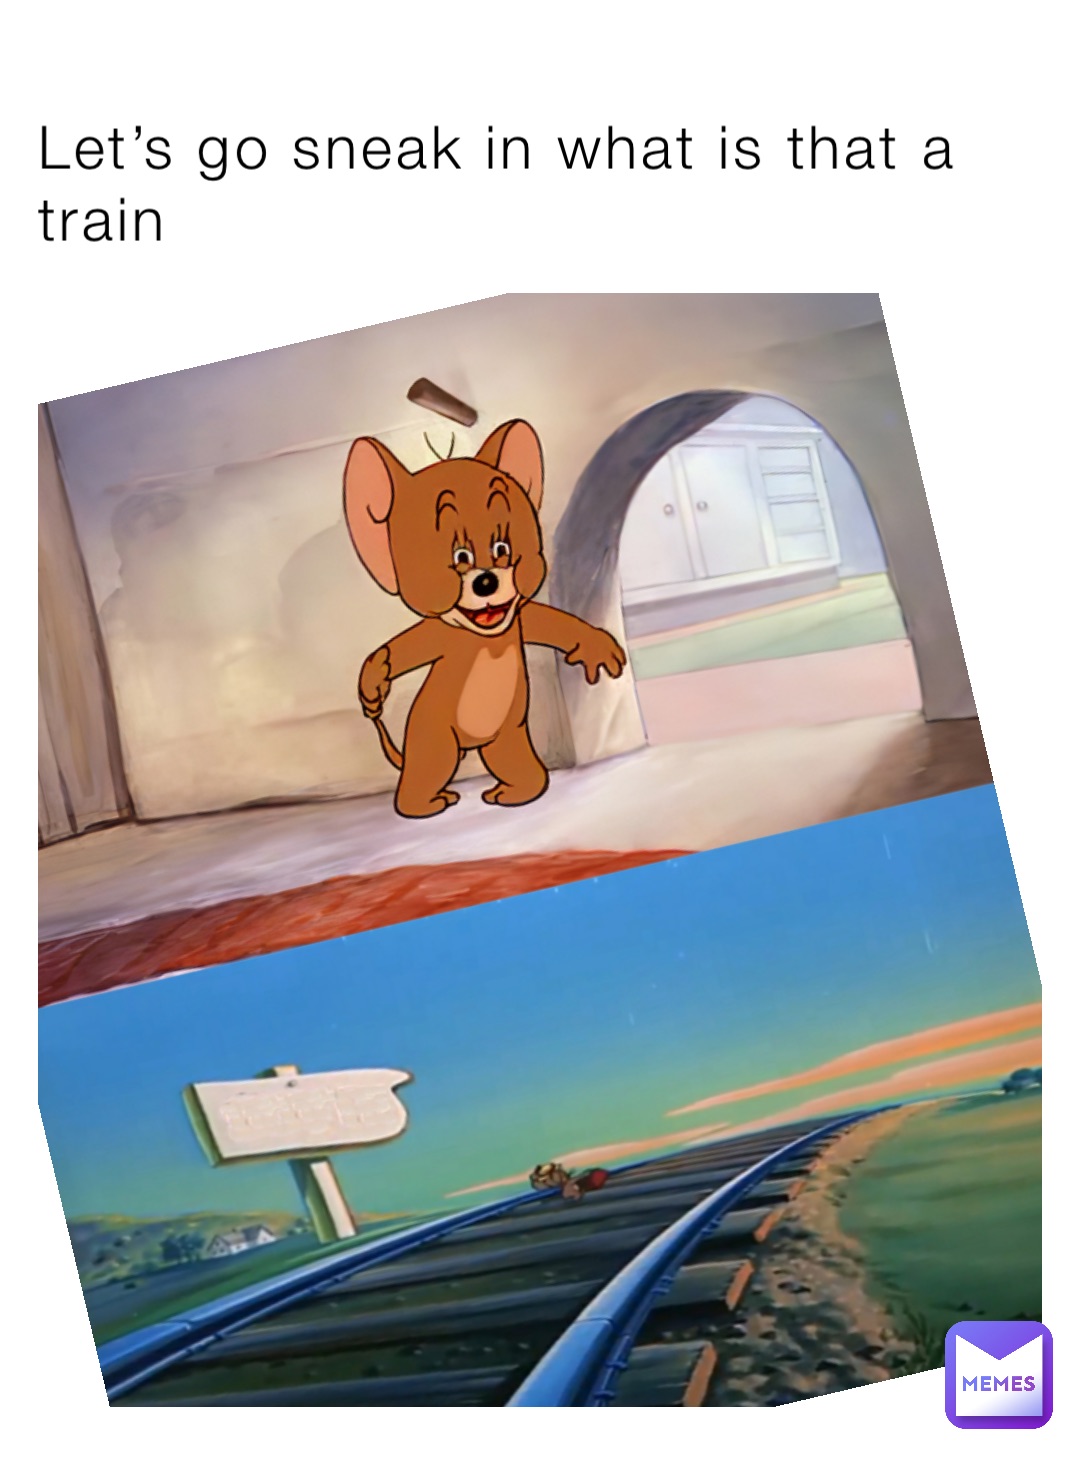 Let’s go sneak in what is that a train